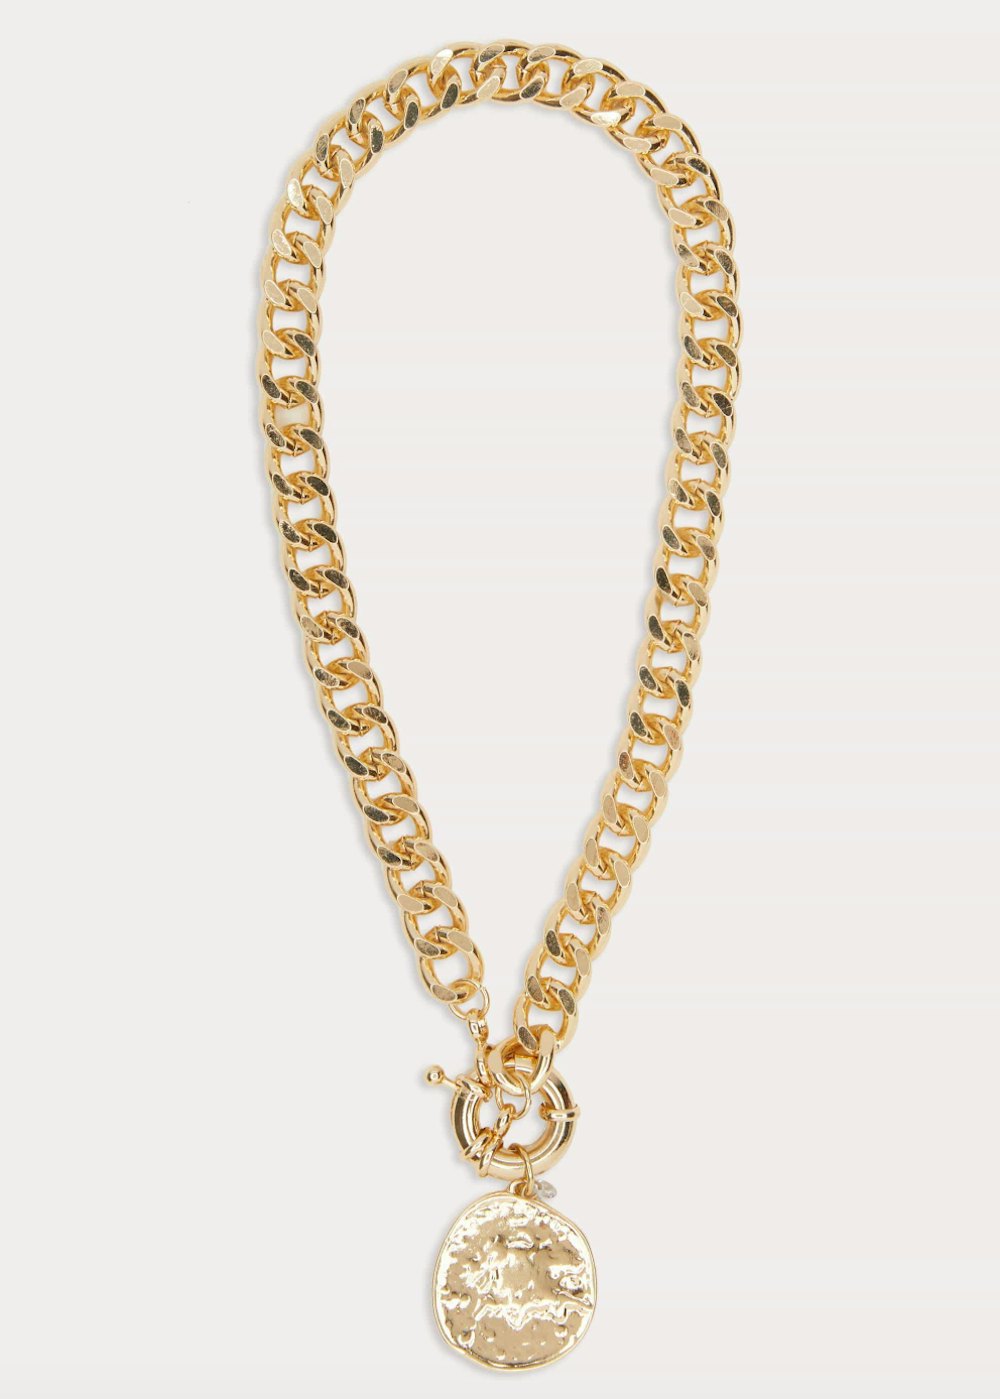 Gold Digger Necklace